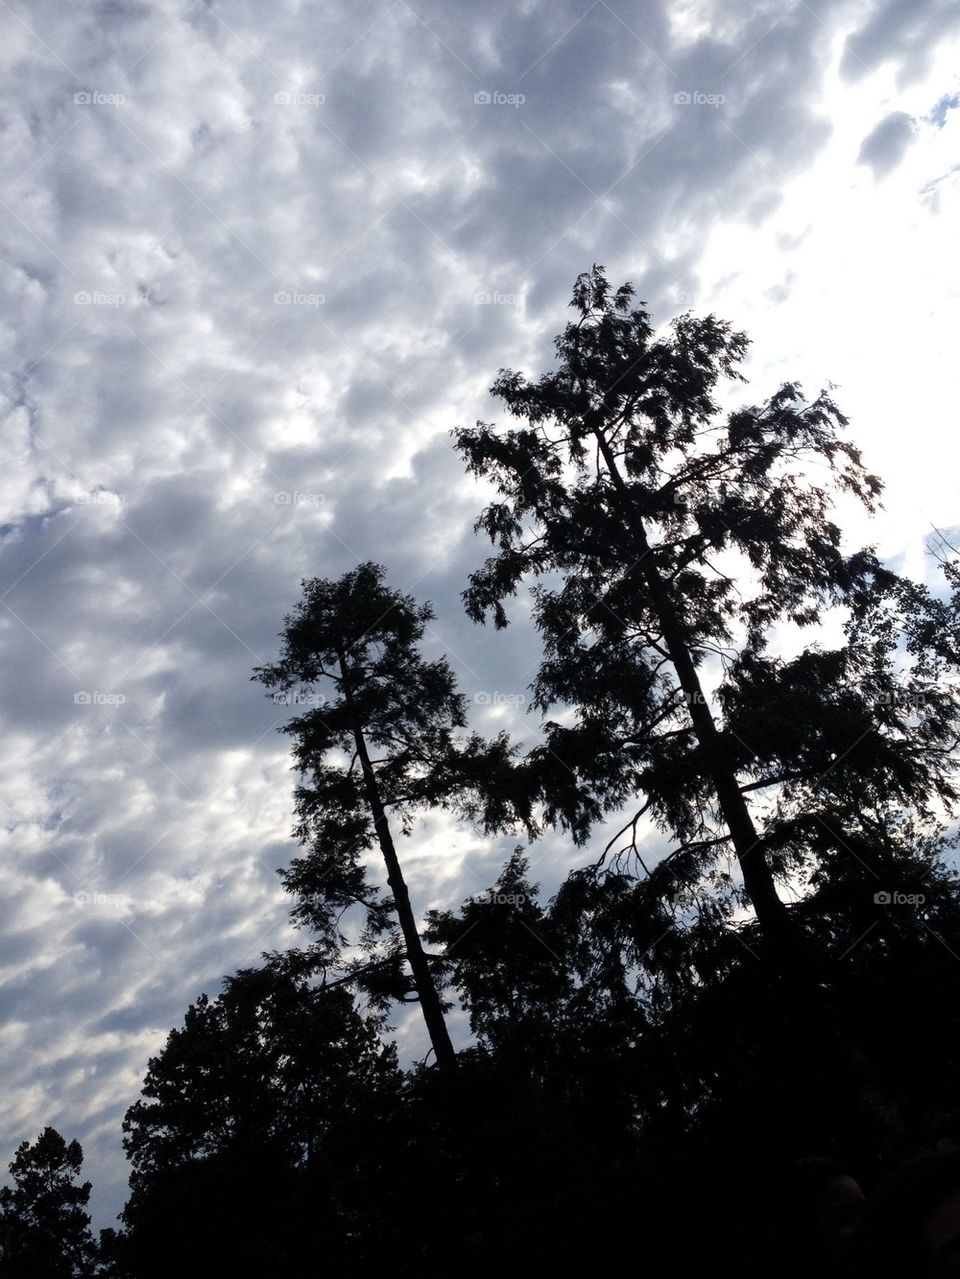 Trees and clouds